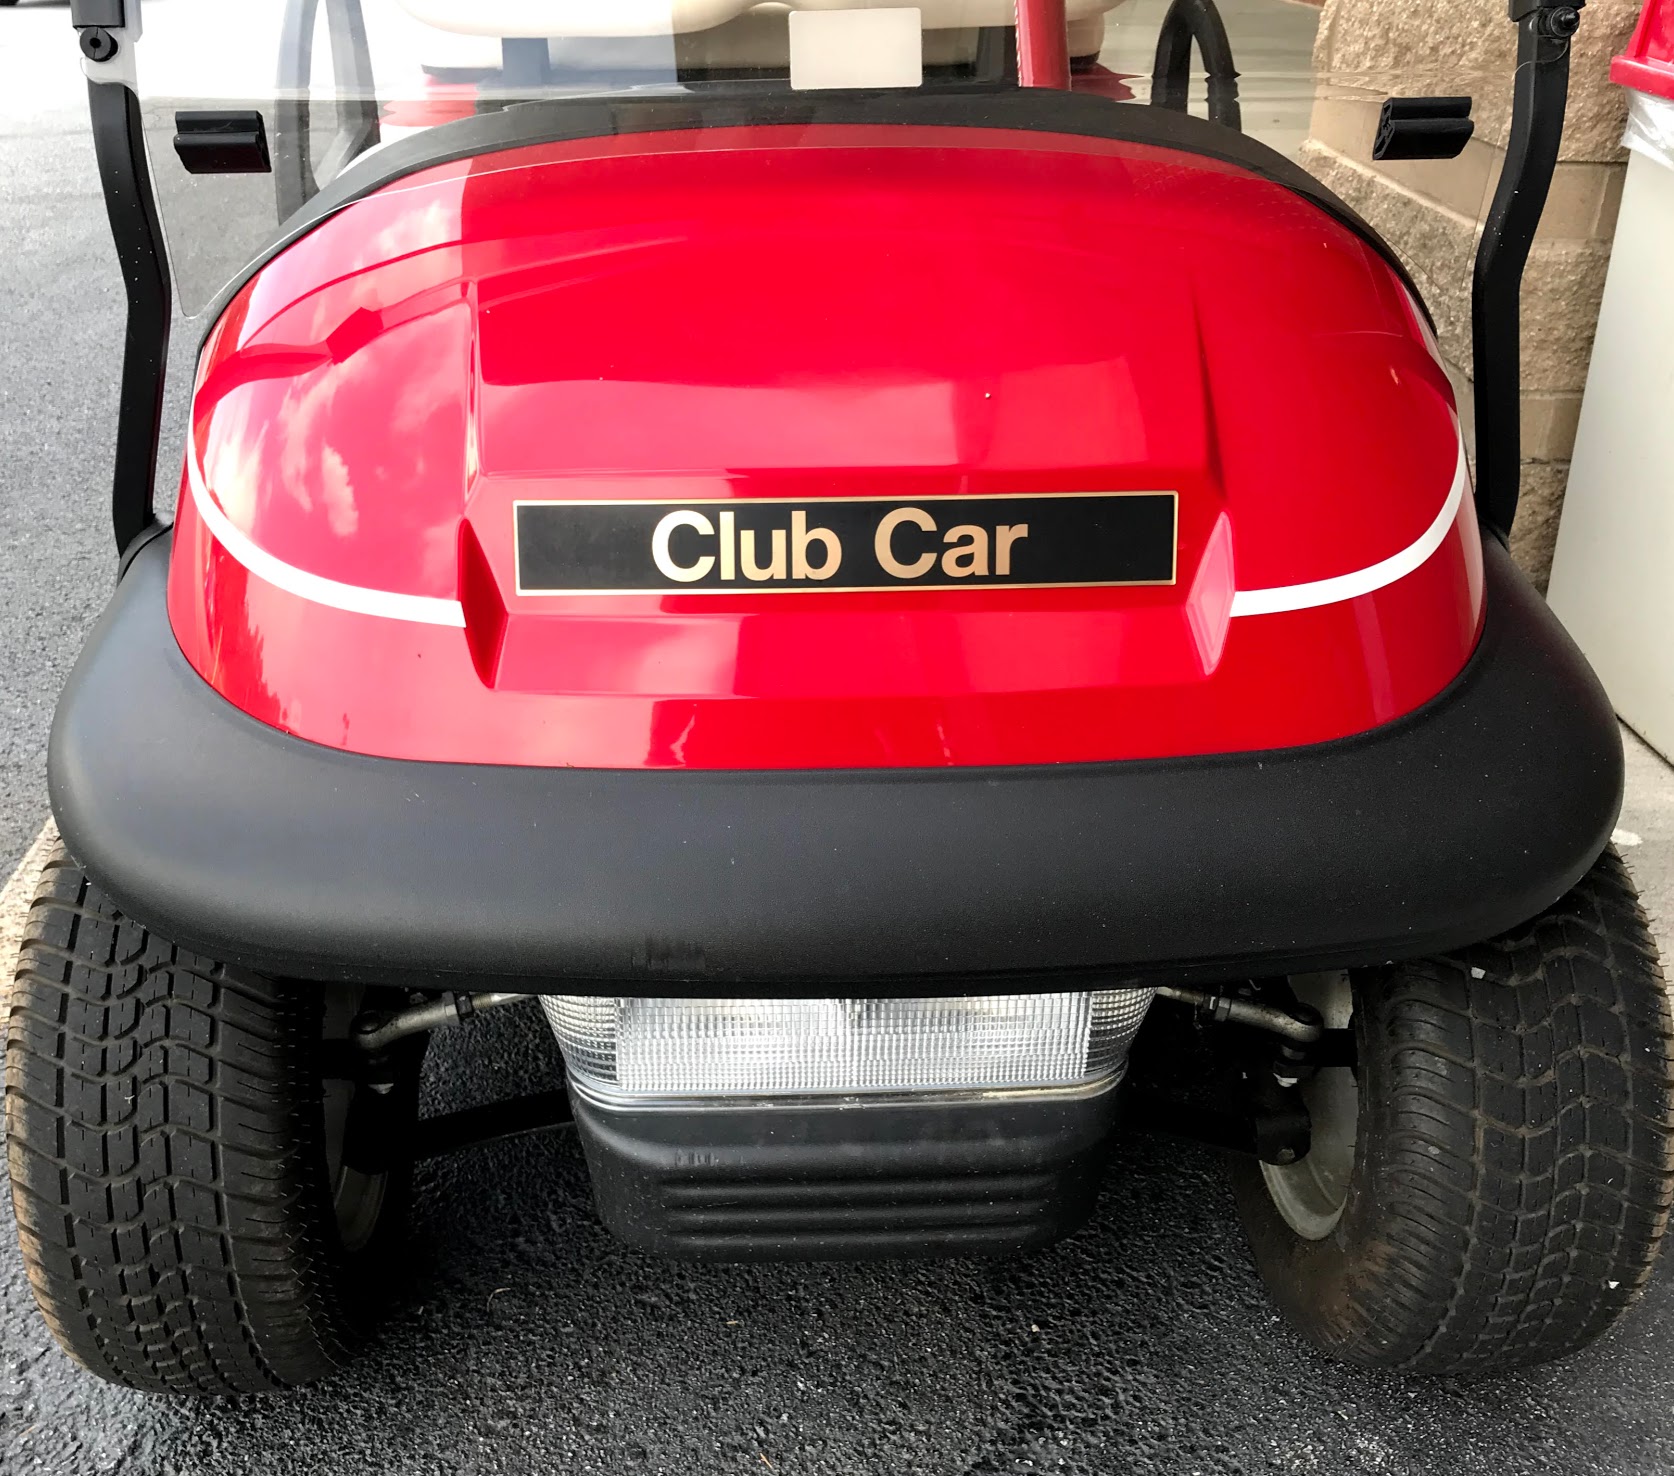 What is the Difference Between a Club Car Precedent and DS?